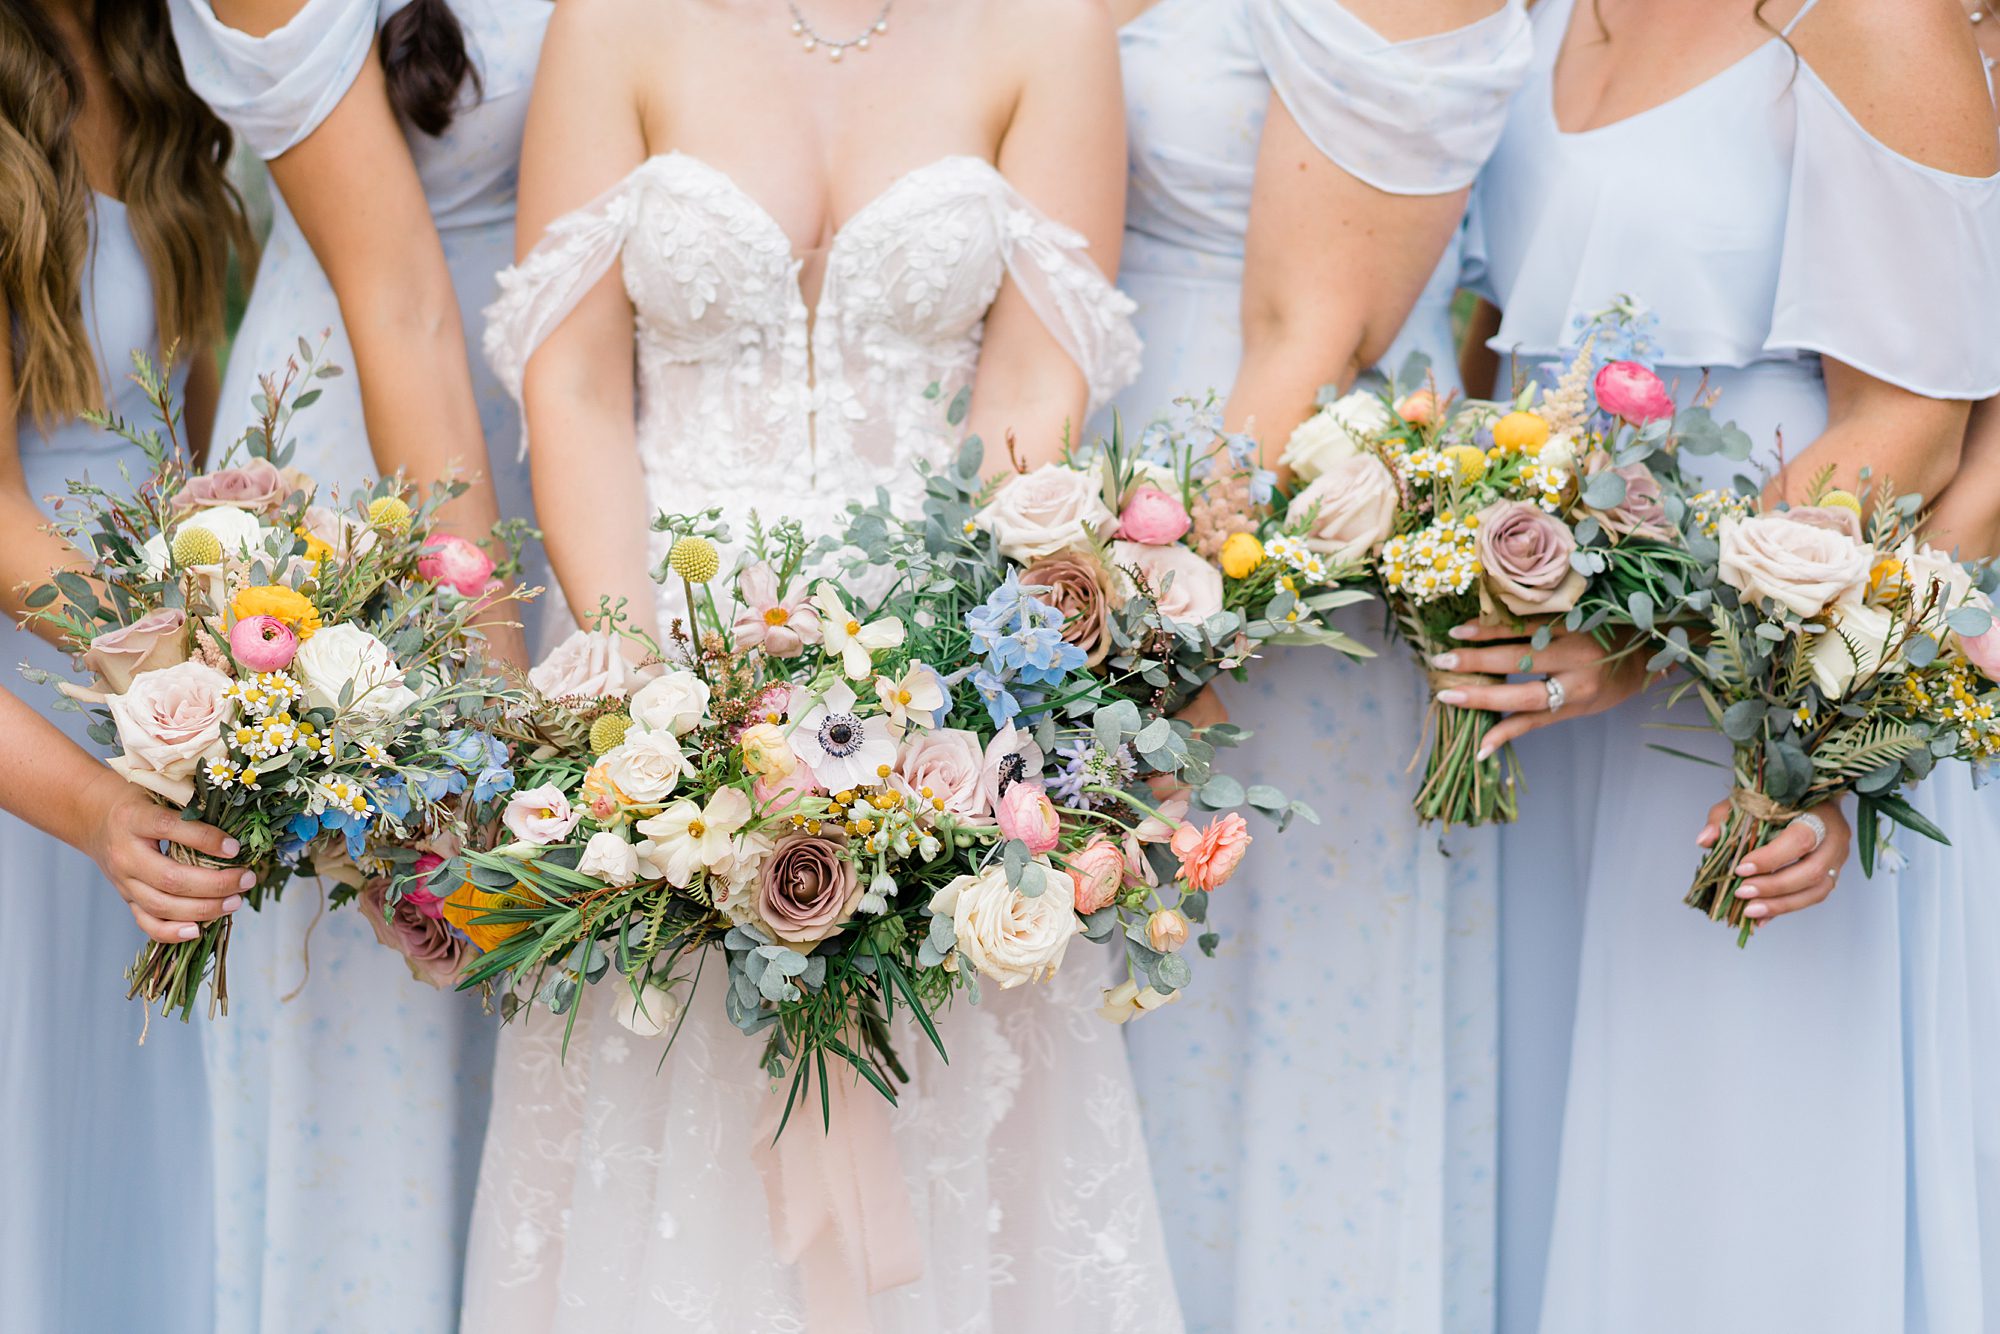 bride and bridesmaids hold garden inspired wedding bouquets